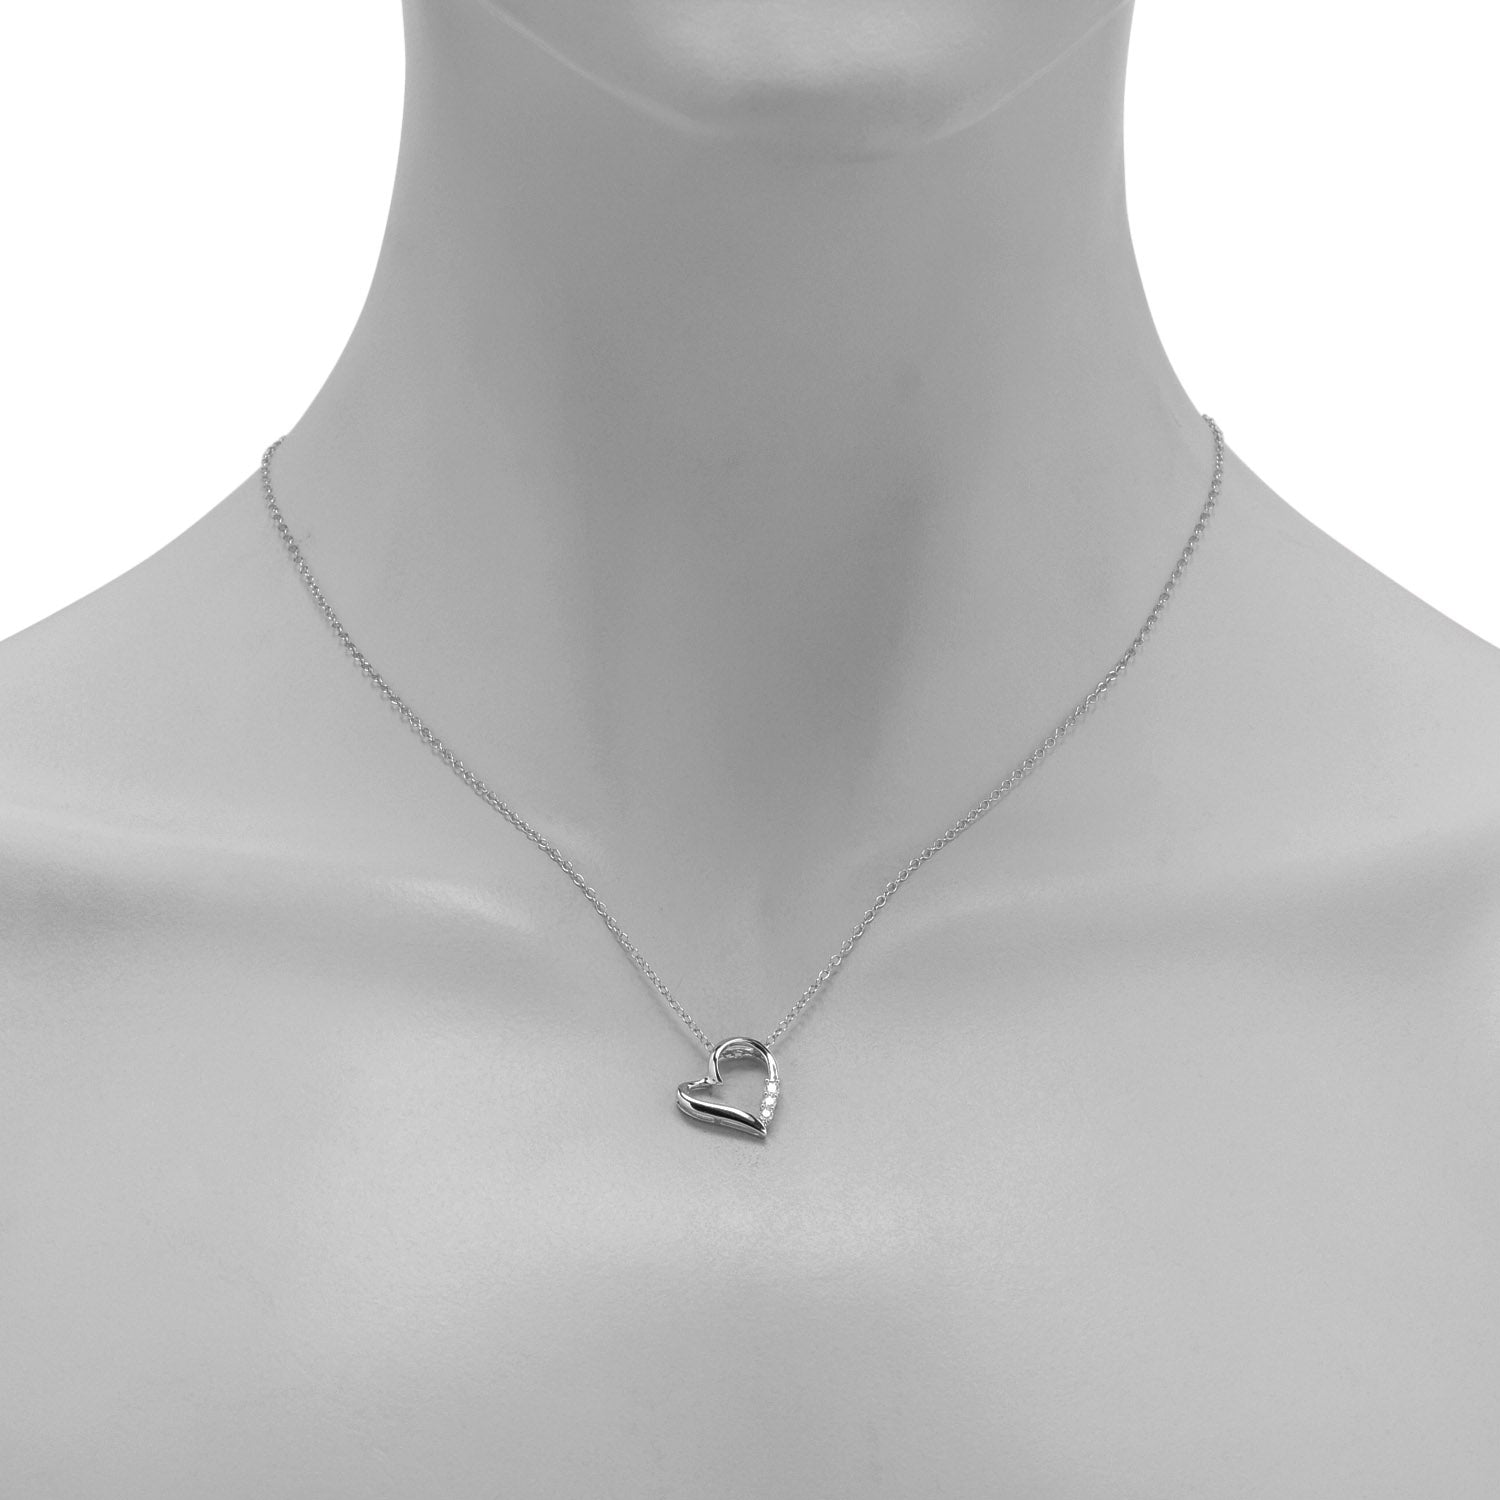 Diamond Heart Necklace in Sterling Silver (1/10ct tw)